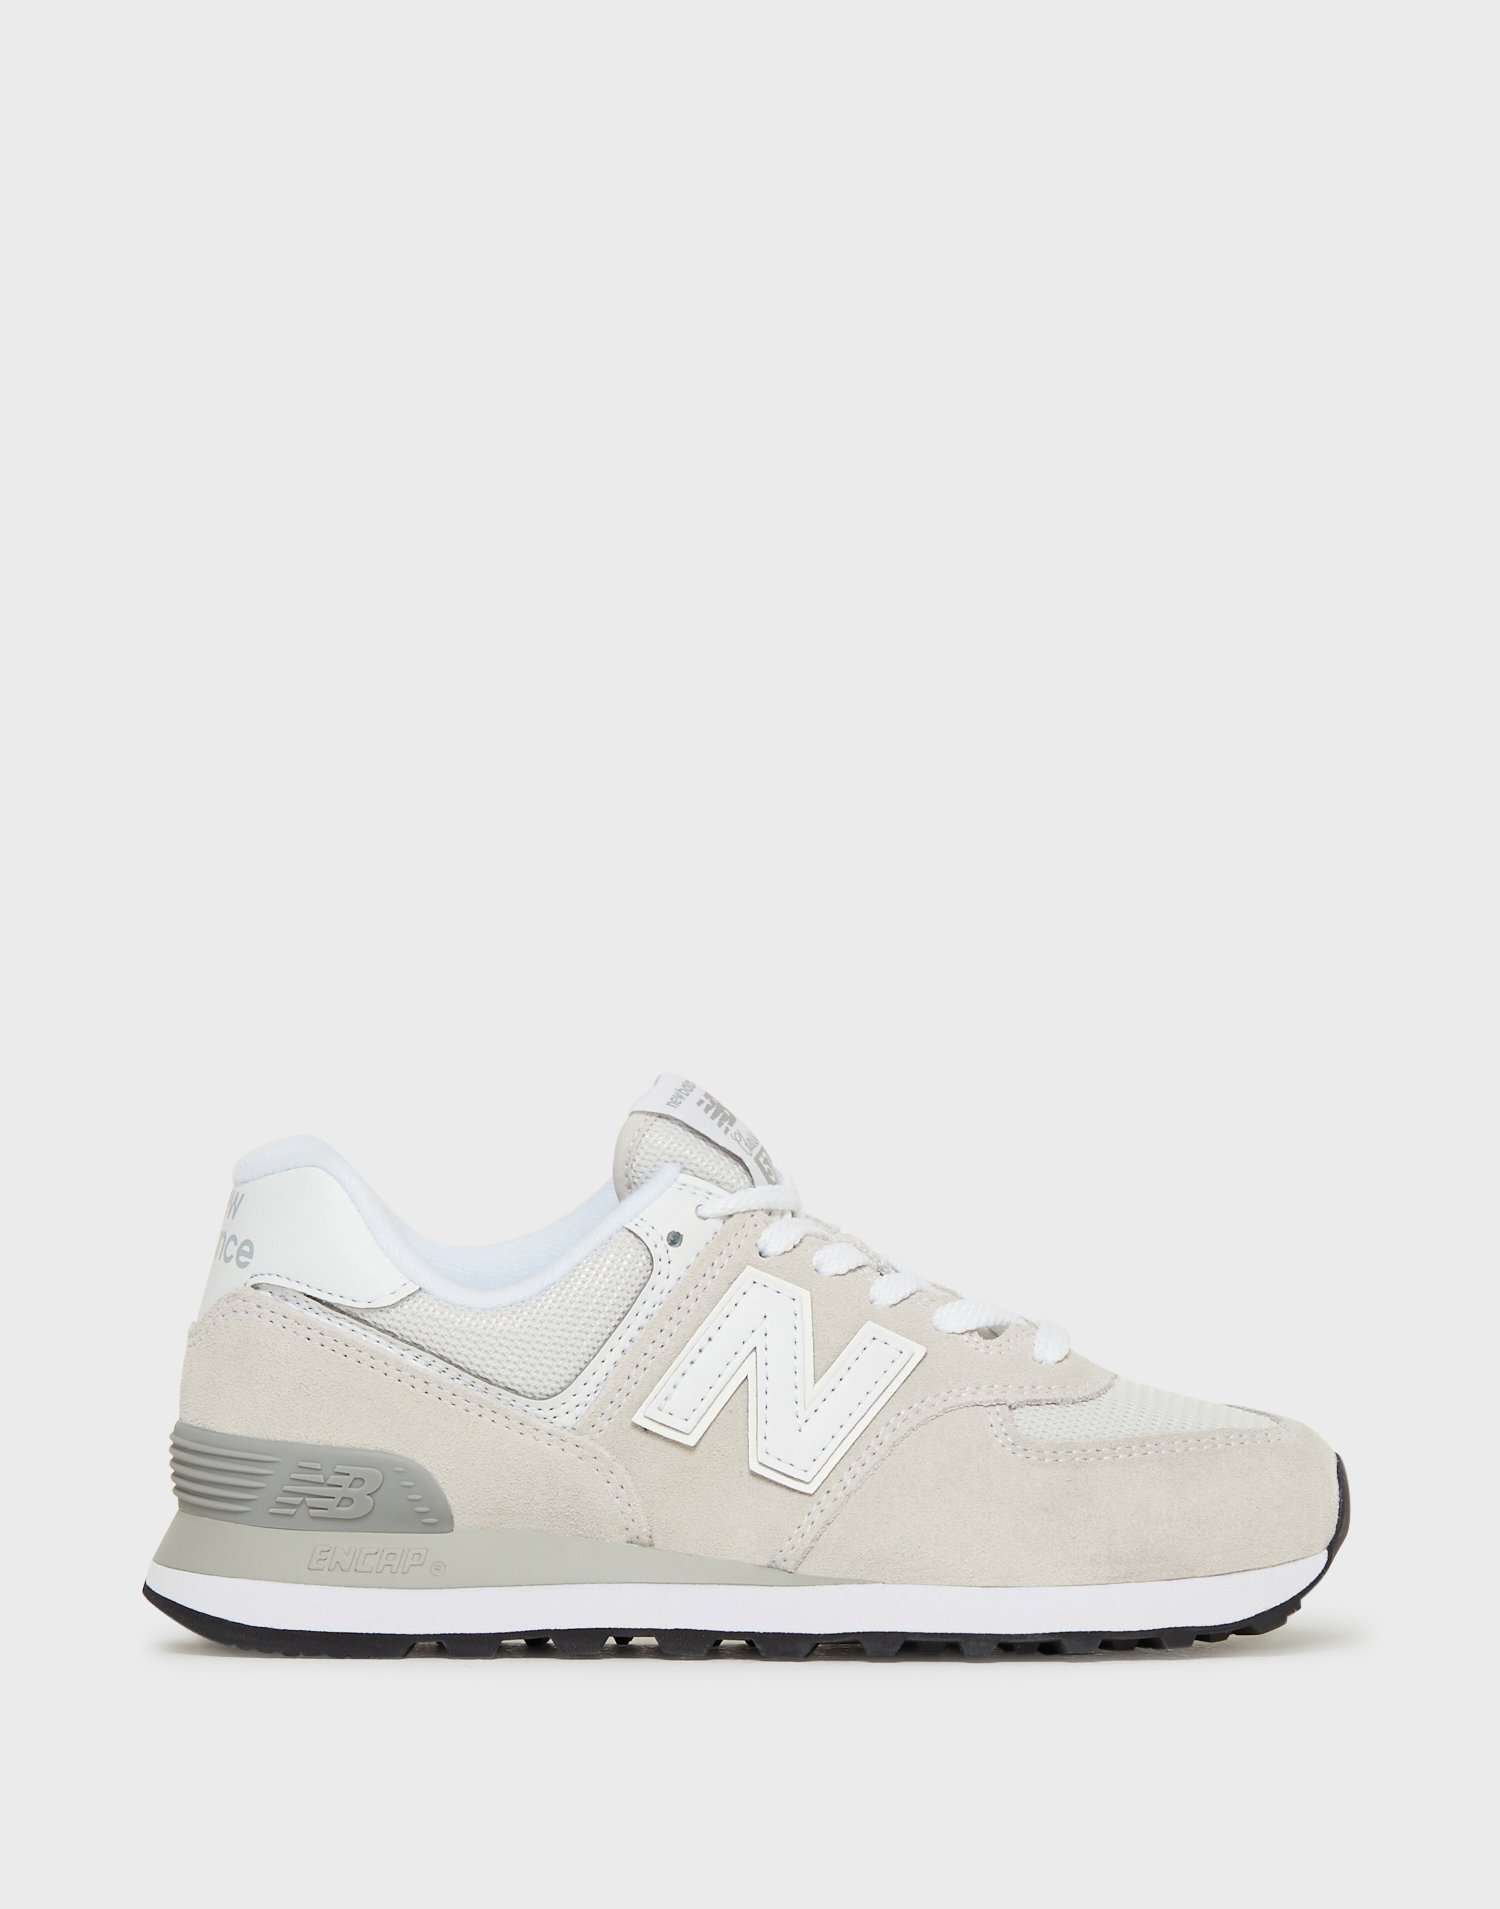 Shop New Balance WL574 - Beige | Sneakers - Nelly.com